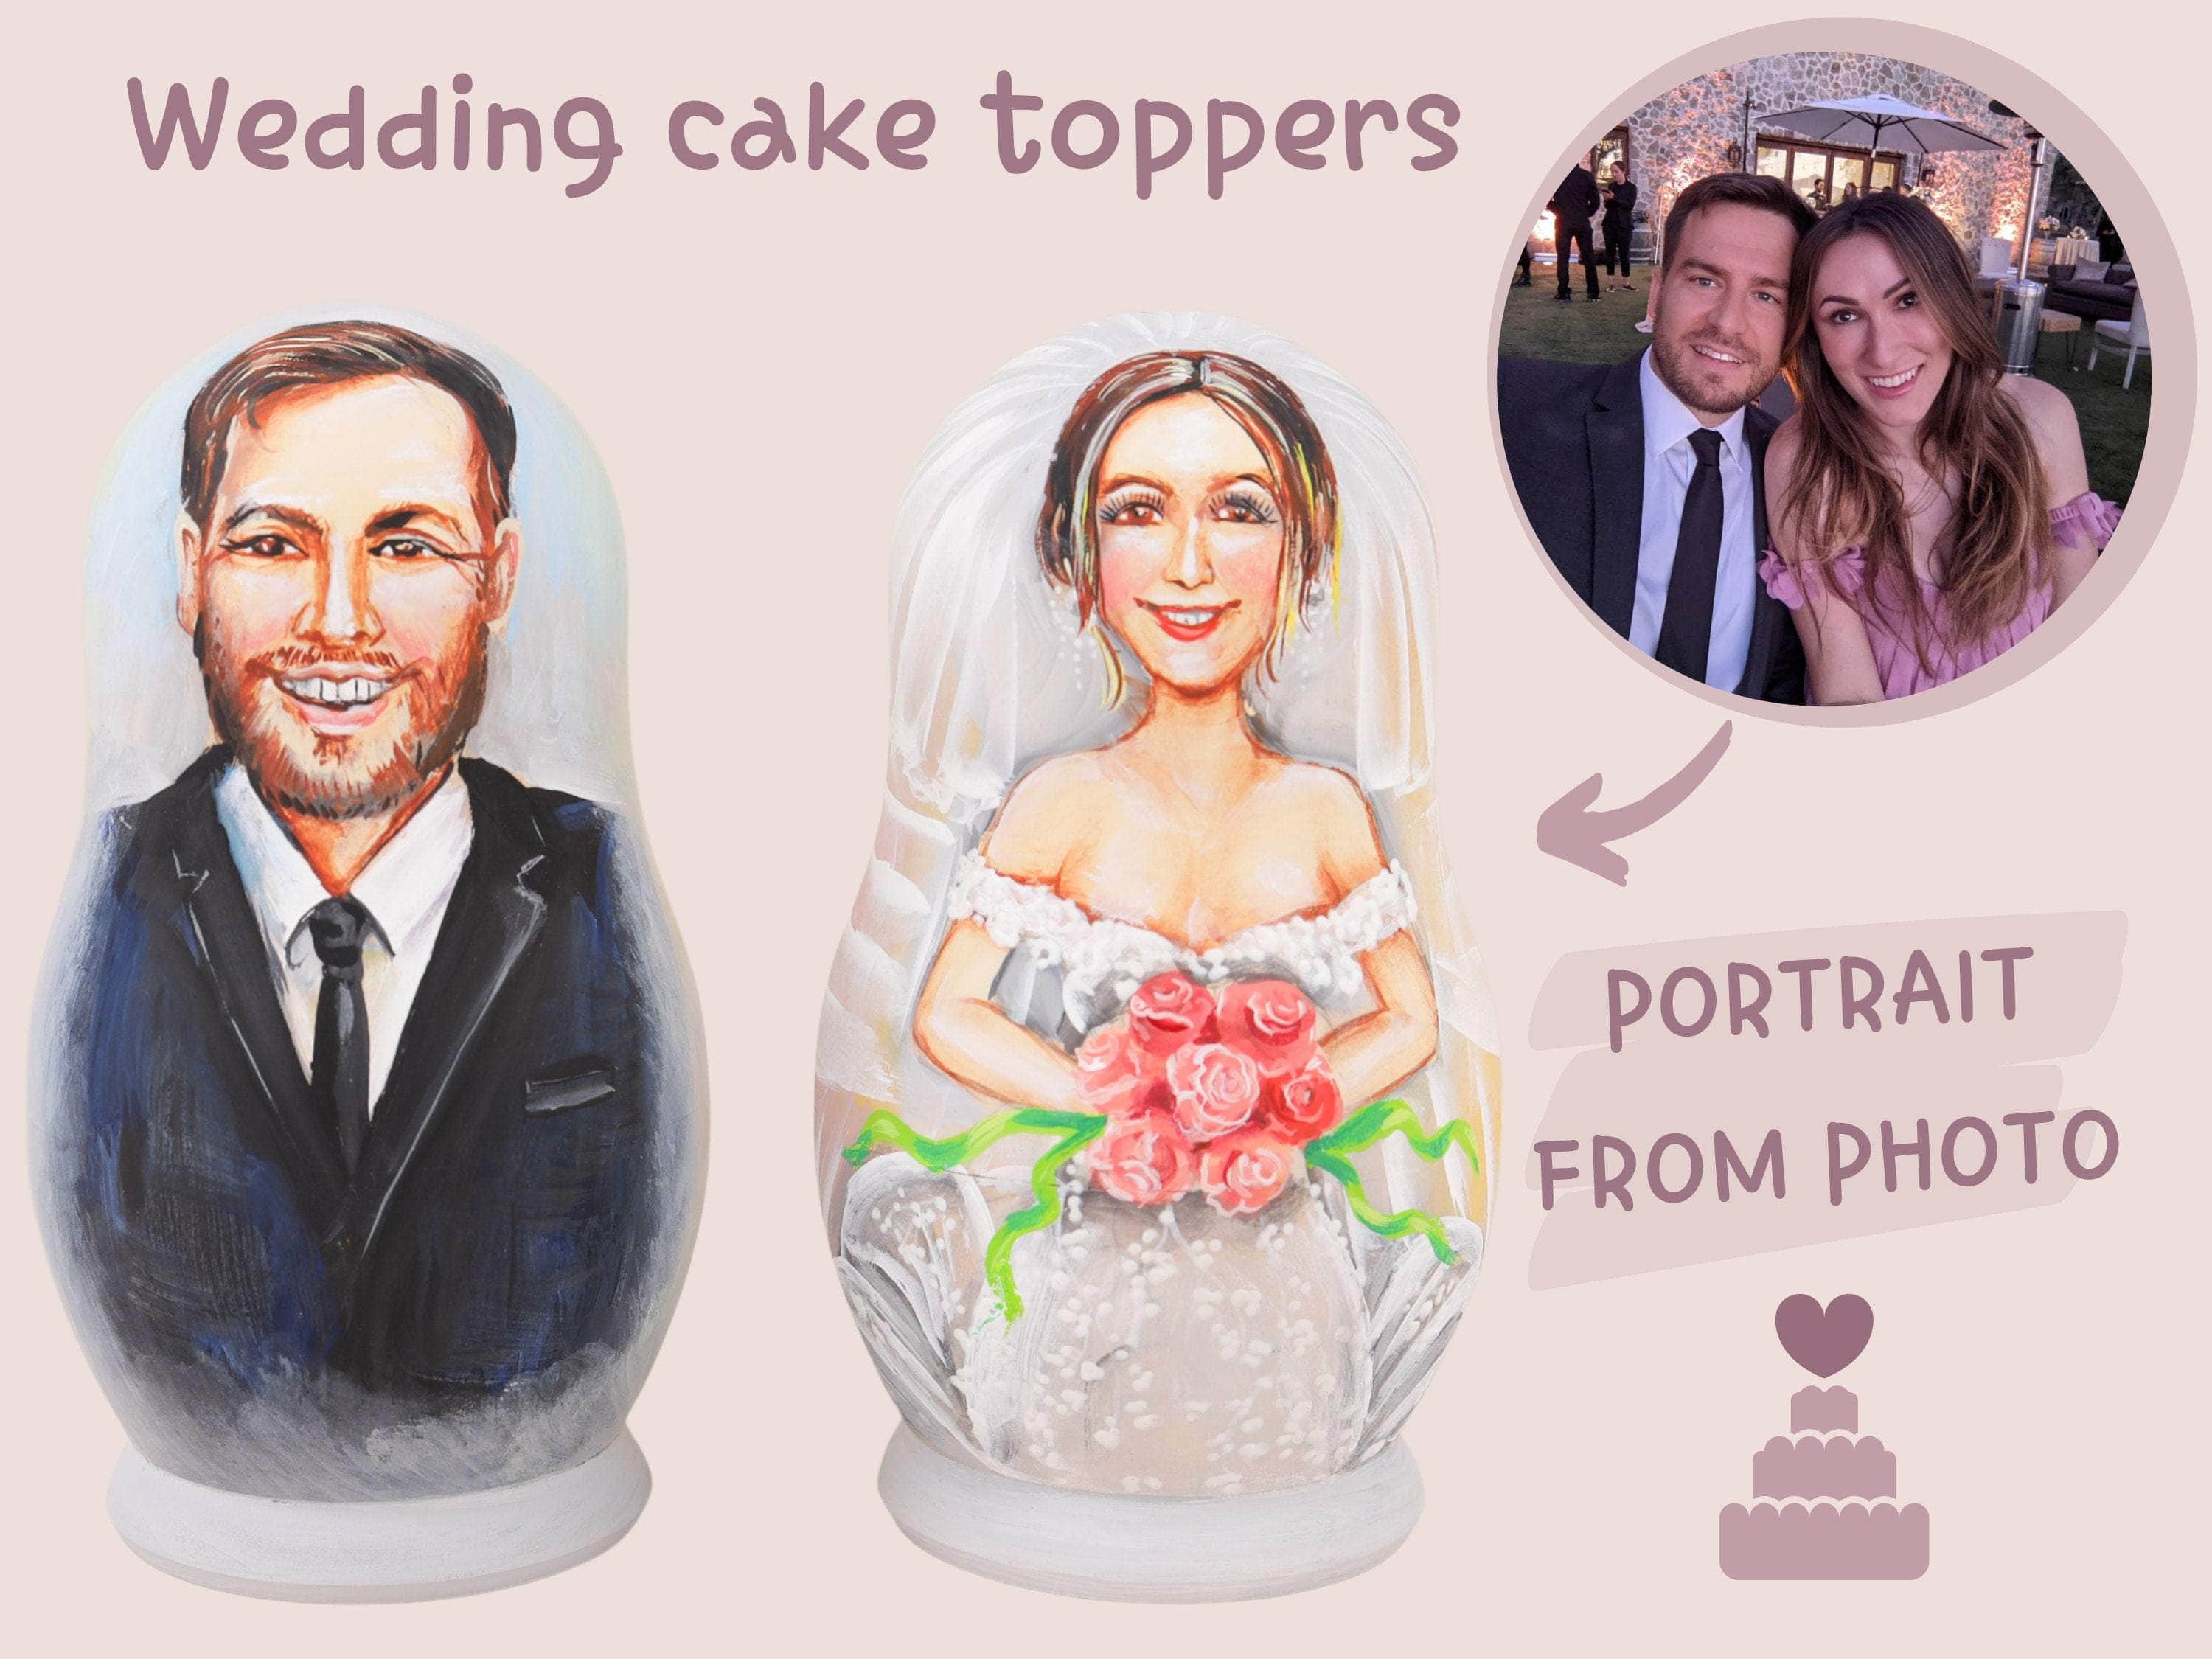 17 Wedding Cake Toppers That Include Your Kid, Because It's A Pretty Big  Day For Them, Too